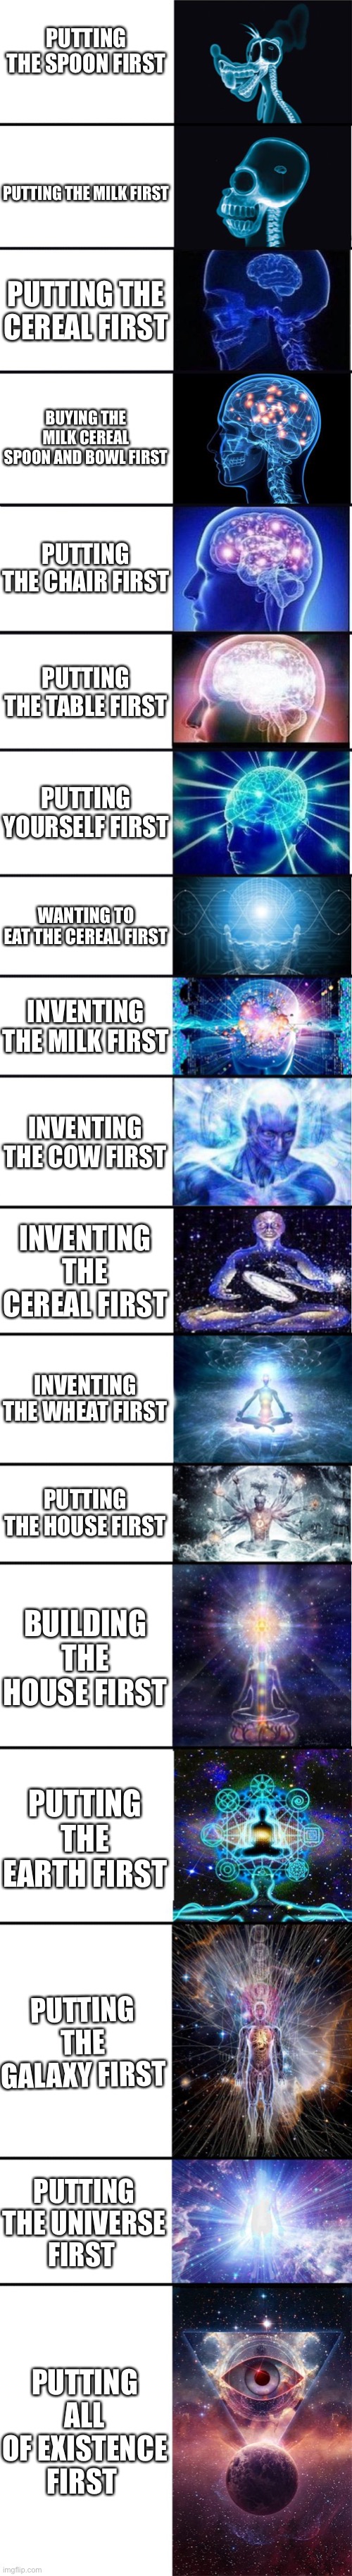 expanding brain: 9001 | PUTTING THE SPOON FIRST; PUTTING THE MILK FIRST; PUTTING THE CEREAL FIRST; BUYING THE MILK CEREAL SPOON AND BOWL FIRST; PUTTING THE CHAIR FIRST; PUTTING THE TABLE FIRST; PUTTING YOURSELF FIRST; WANTING TO EAT THE CEREAL FIRST; INVENTING THE MILK FIRST; INVENTING THE COW FIRST; INVENTING THE CEREAL FIRST; INVENTING THE WHEAT FIRST; PUTTING THE HOUSE FIRST; BUILDING THE HOUSE FIRST; PUTTING THE EARTH FIRST; PUTTING THE GALAXY FIRST; PUTTING THE UNIVERSE FIRST; PUTTING ALL OF EXISTENCE FIRST | image tagged in expanding brain 9001,dank memes,smort,infinite iq,meme | made w/ Imgflip meme maker